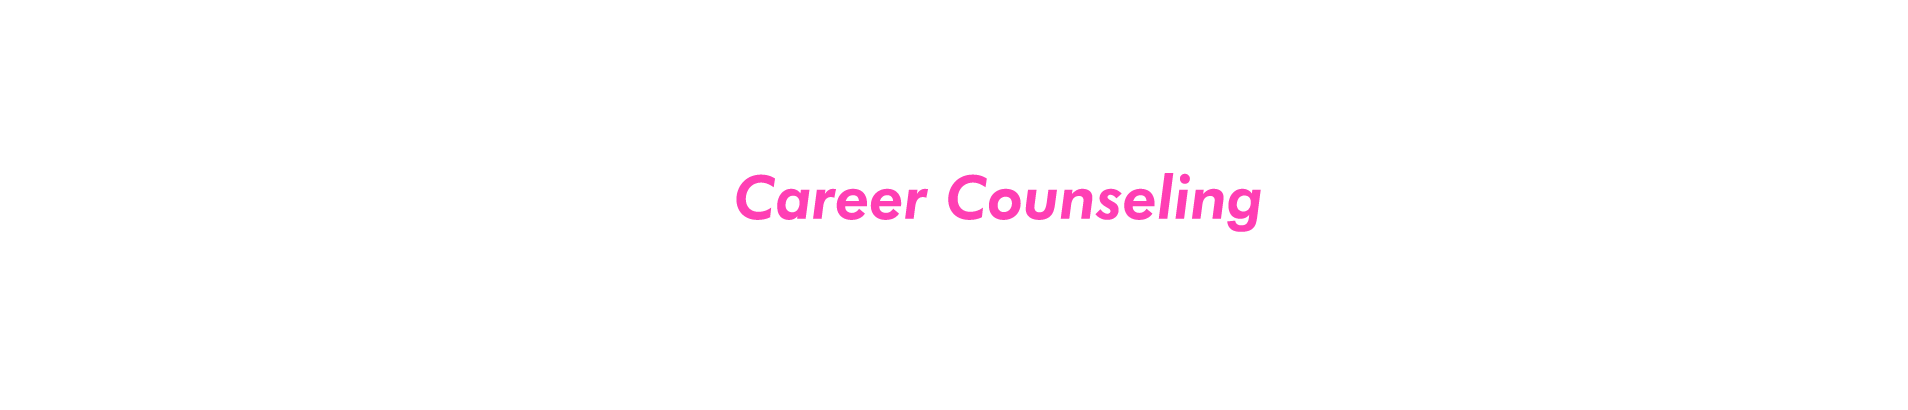 SUPPORT1、Career Counseling、アスリートのための個別キャリア相談